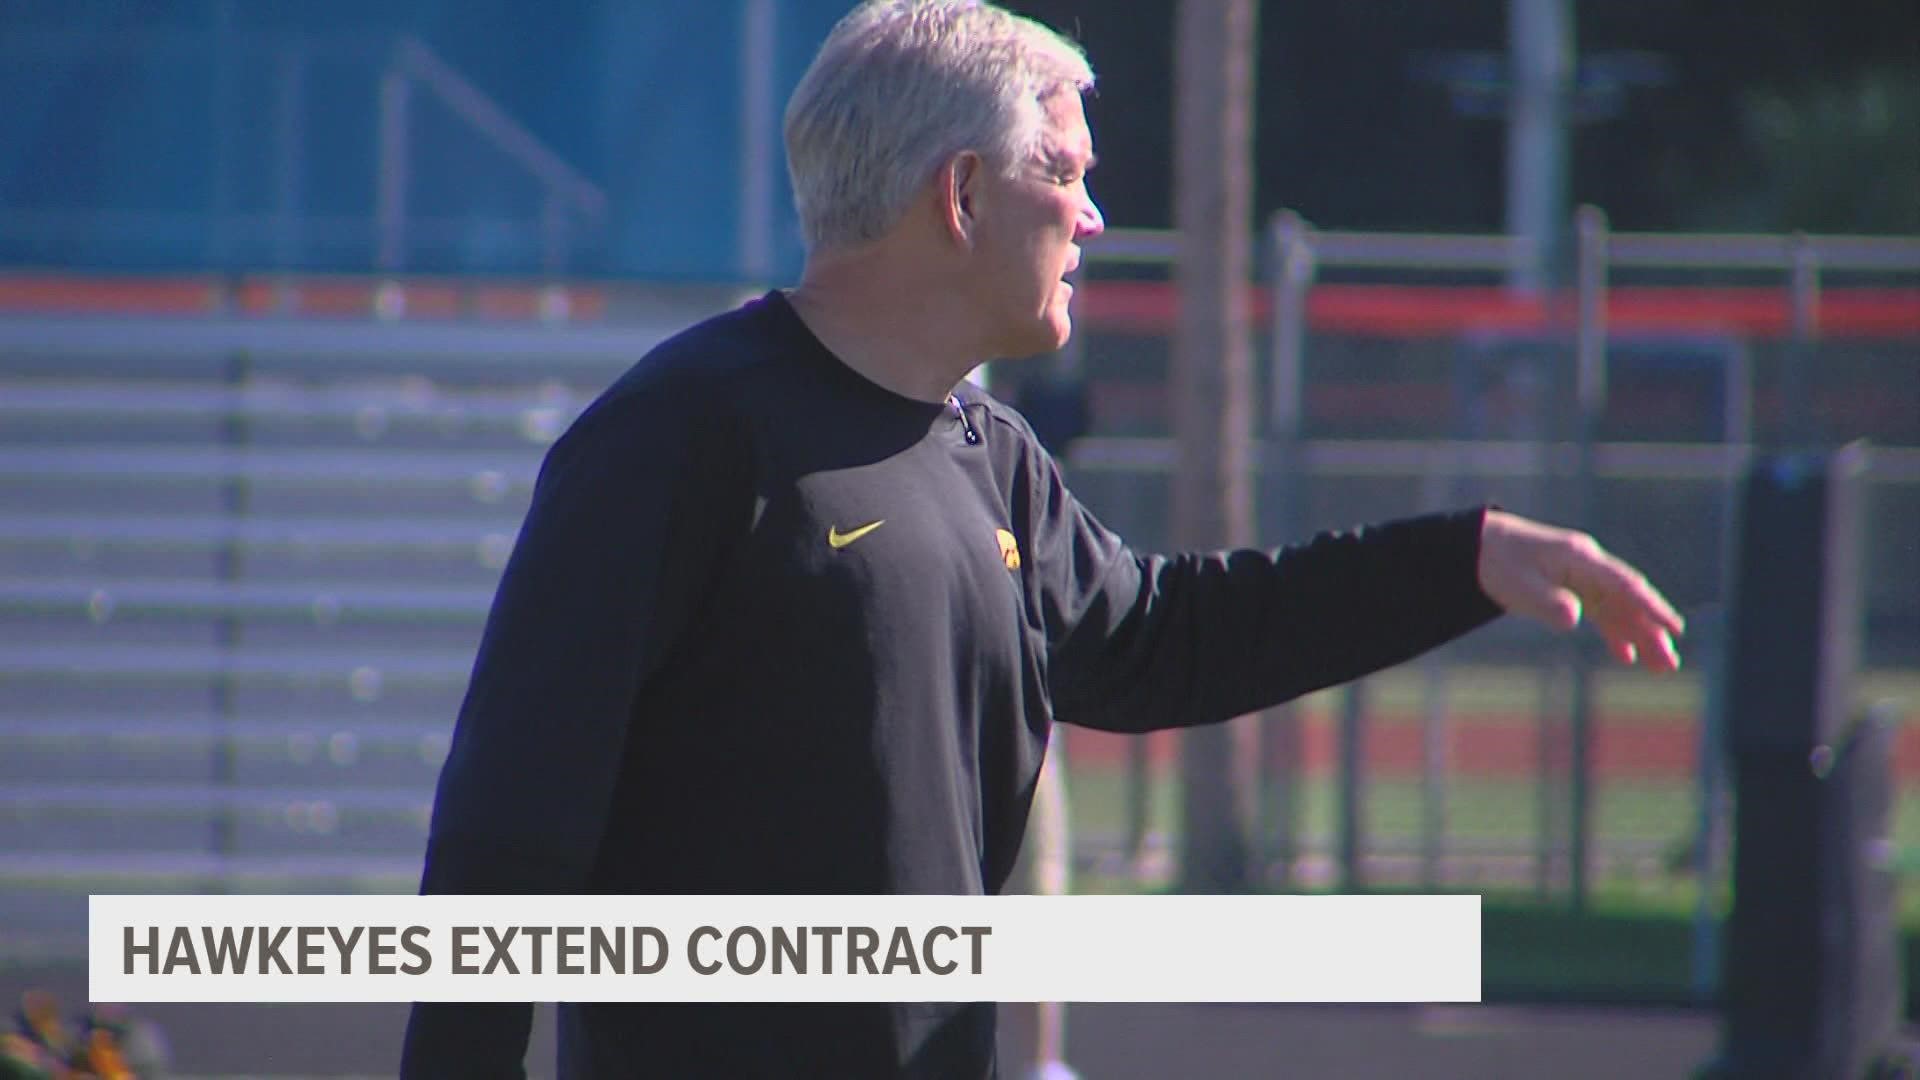 The University of Iowa on Friday announced the four-year extension that followed a 10-4 record in 2021. It was Ferentz’s 23rd season at Iowa.